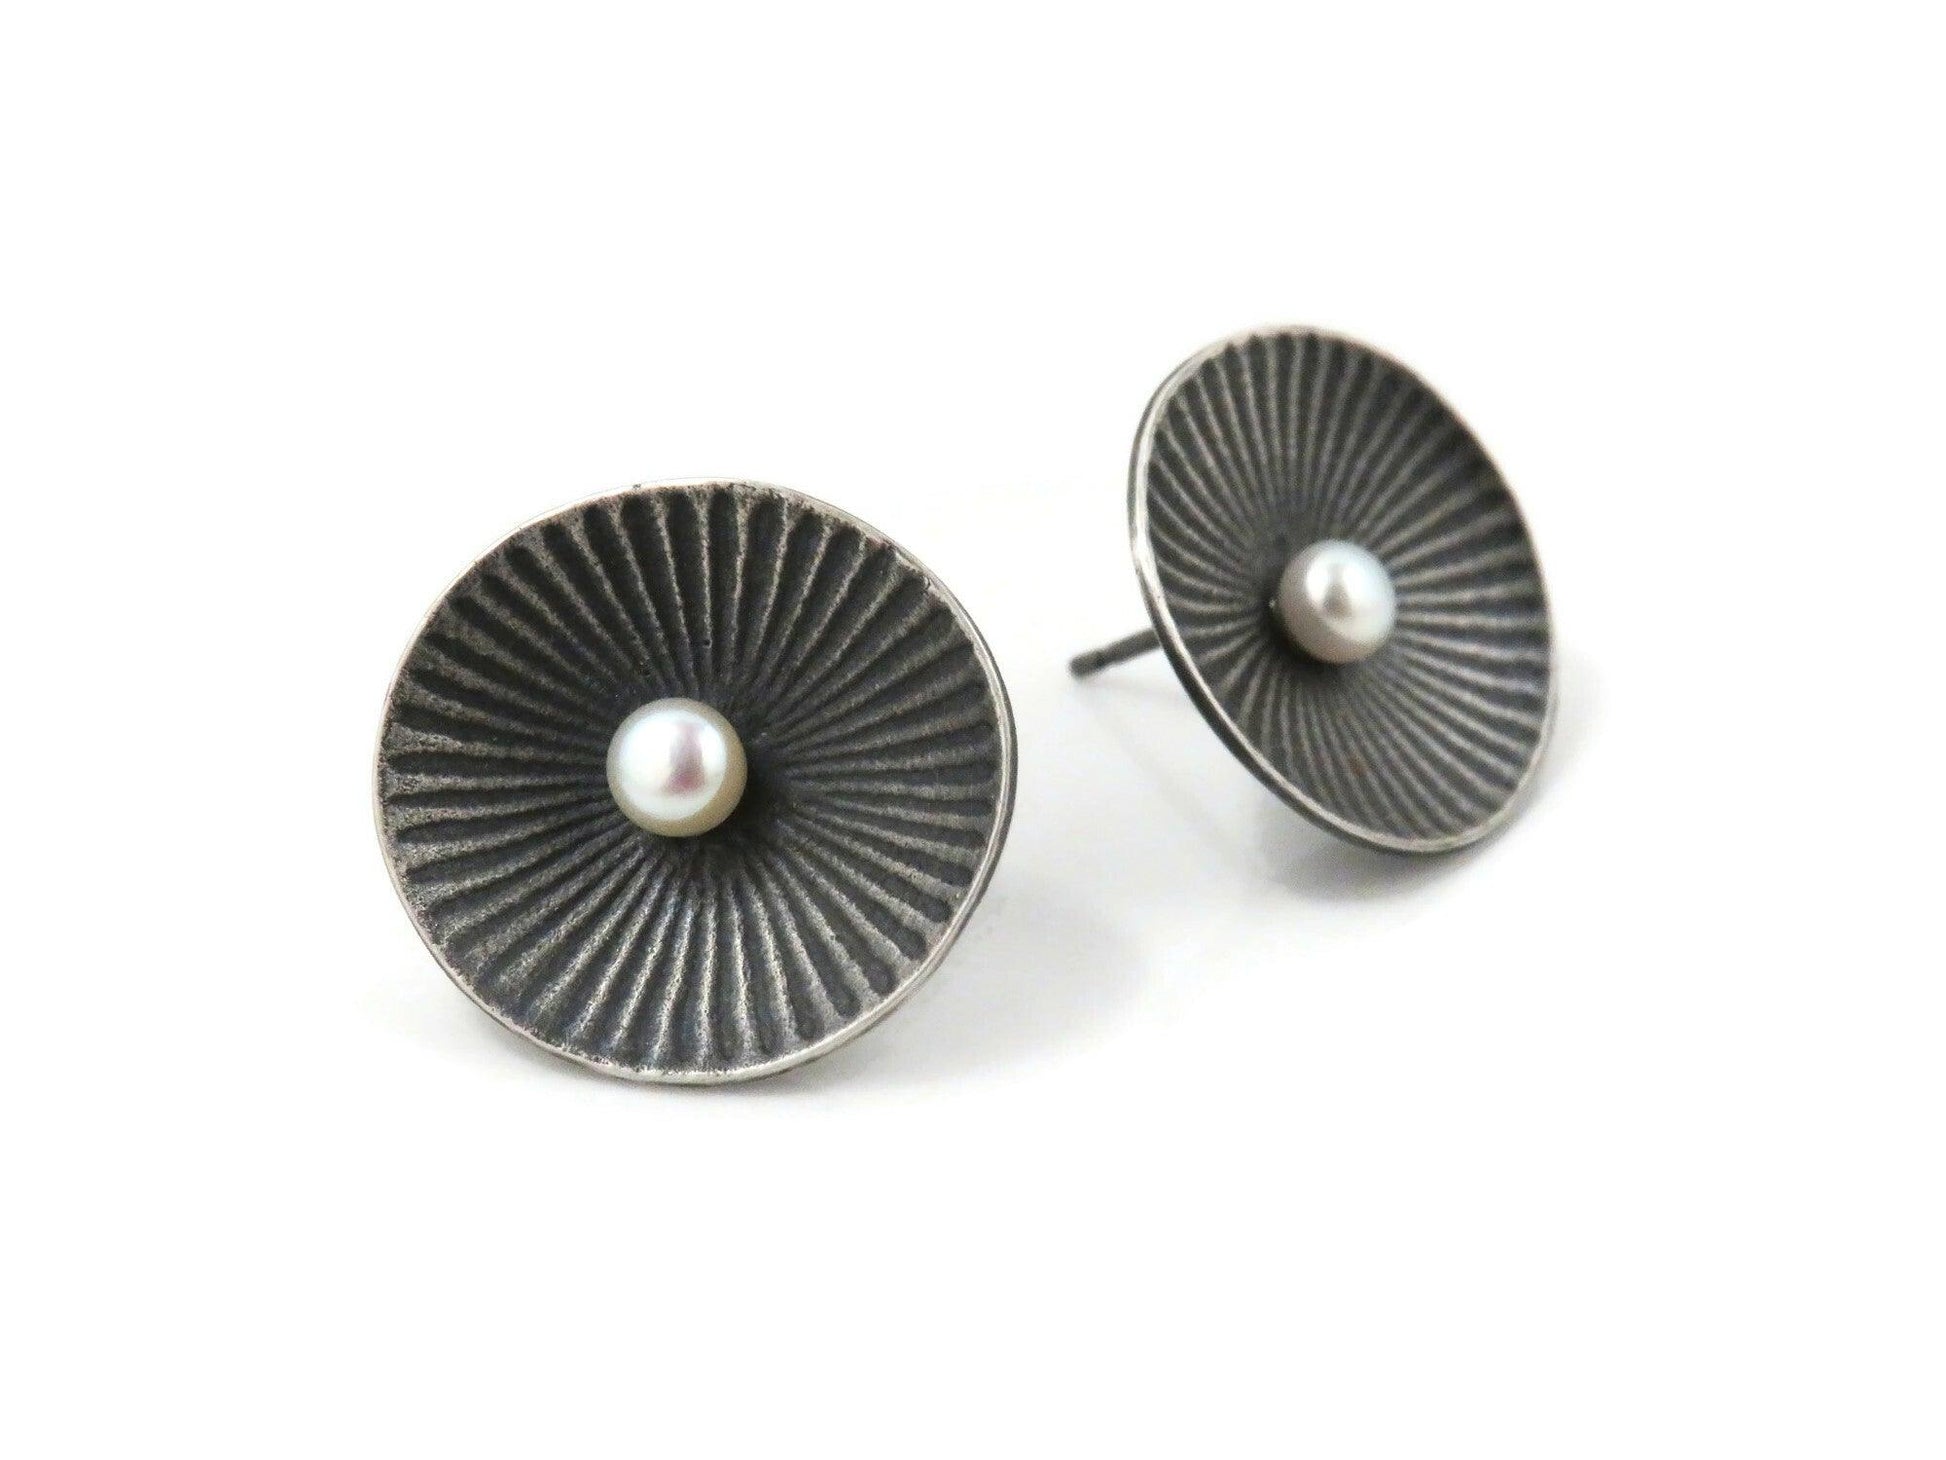 Pearl Silver Earrings with Embossed Design